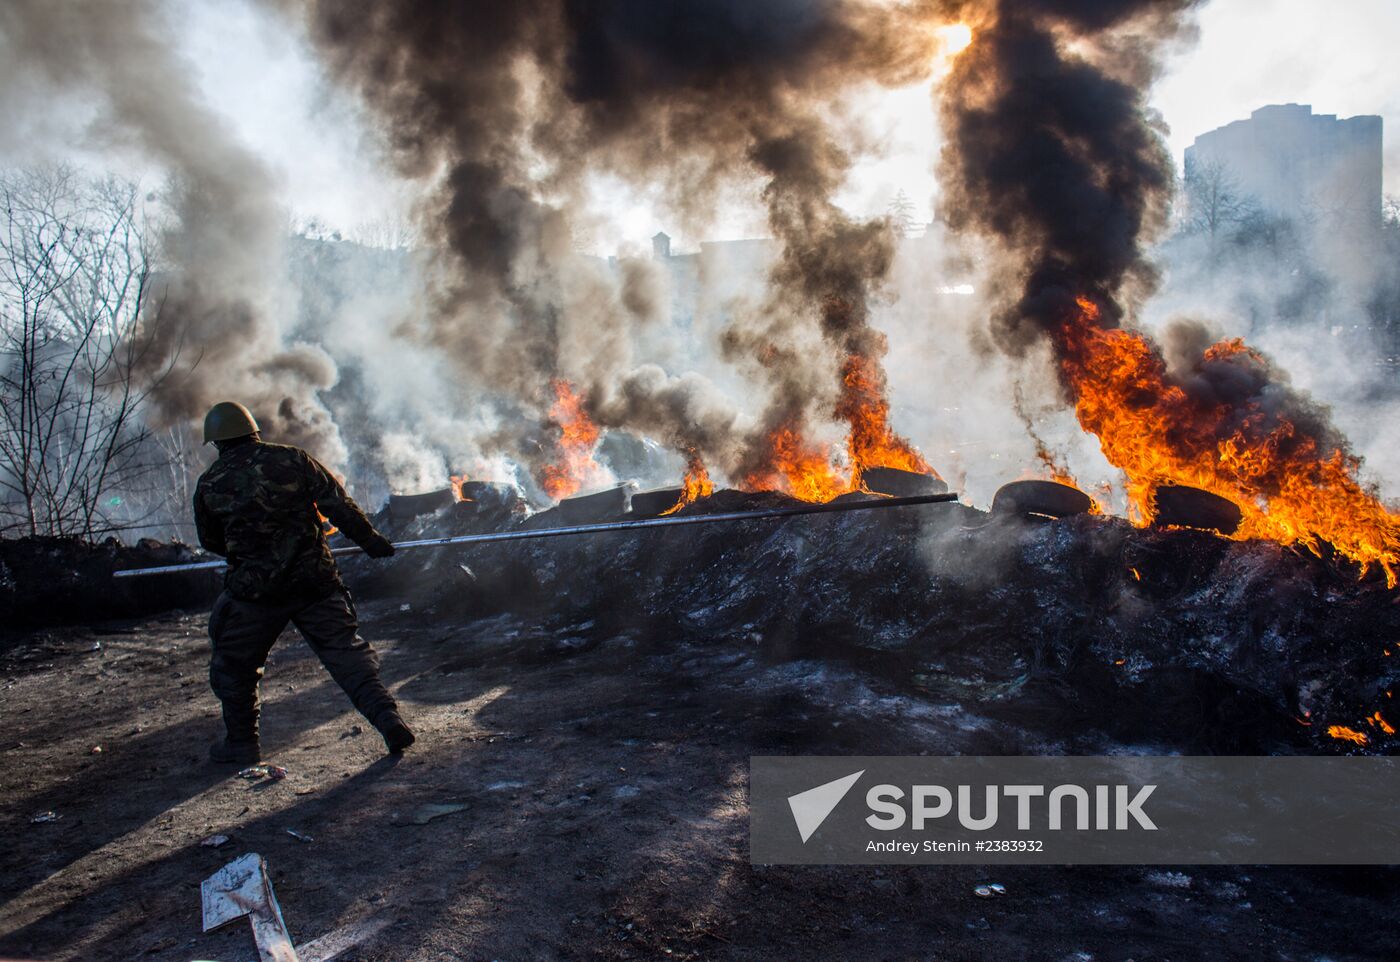 Mass protests in Kiev: Update